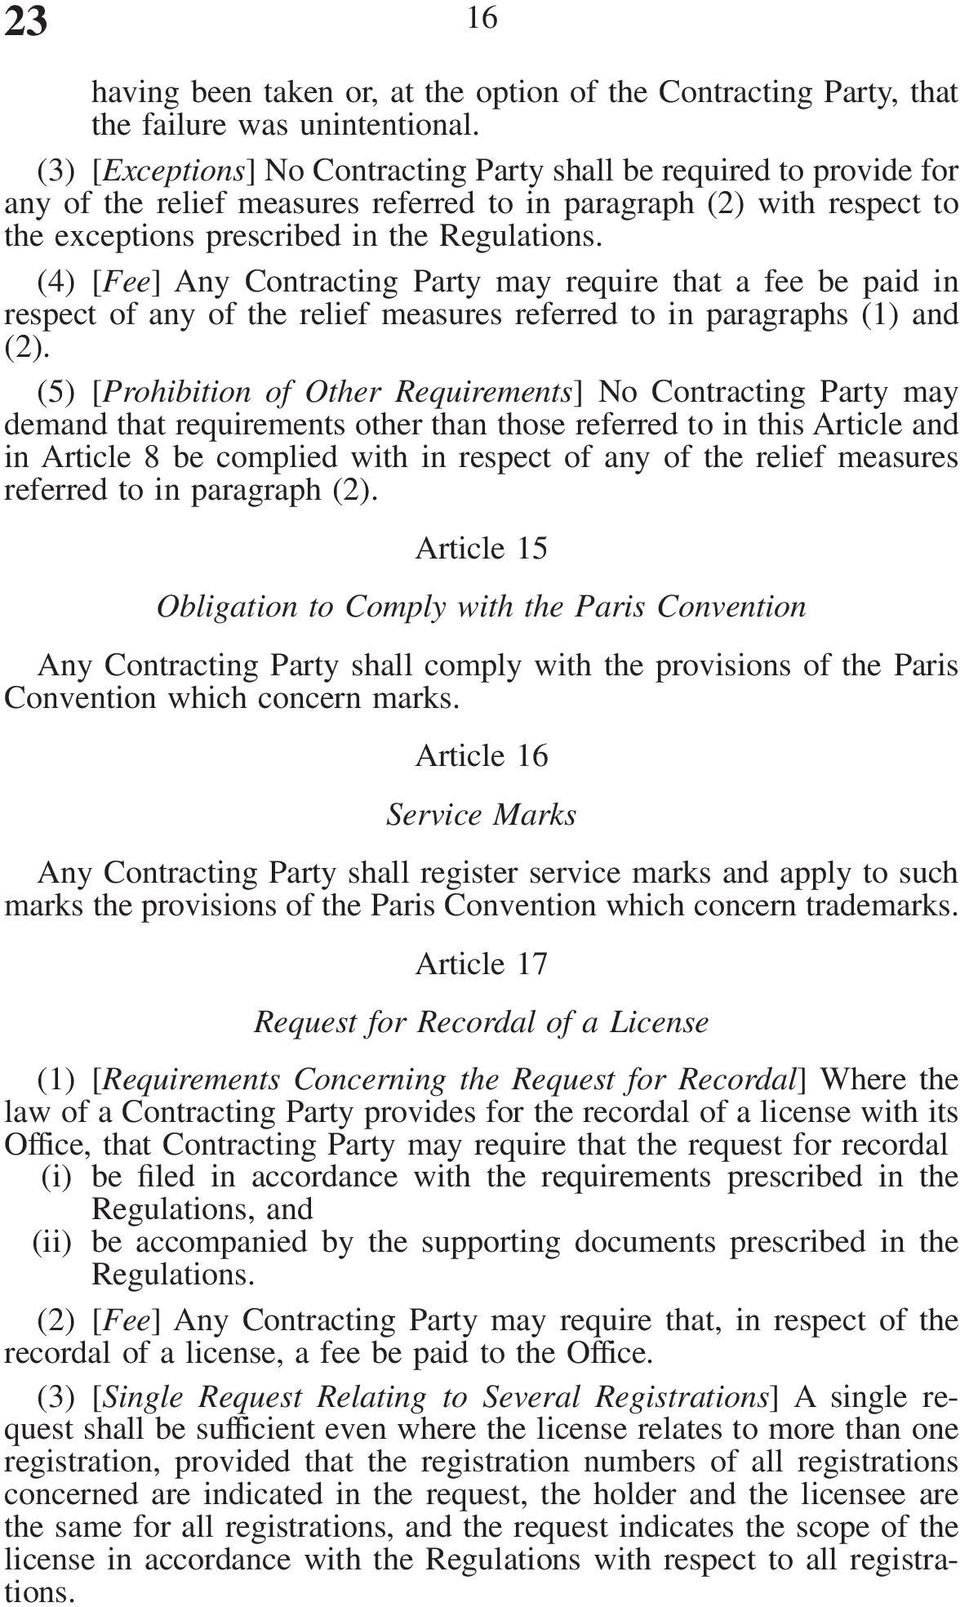 (4) [Fee] Any Contracting Party may require that a fee be paid in respect of any of the relief measures referred to in paragraphs (1) and (2).